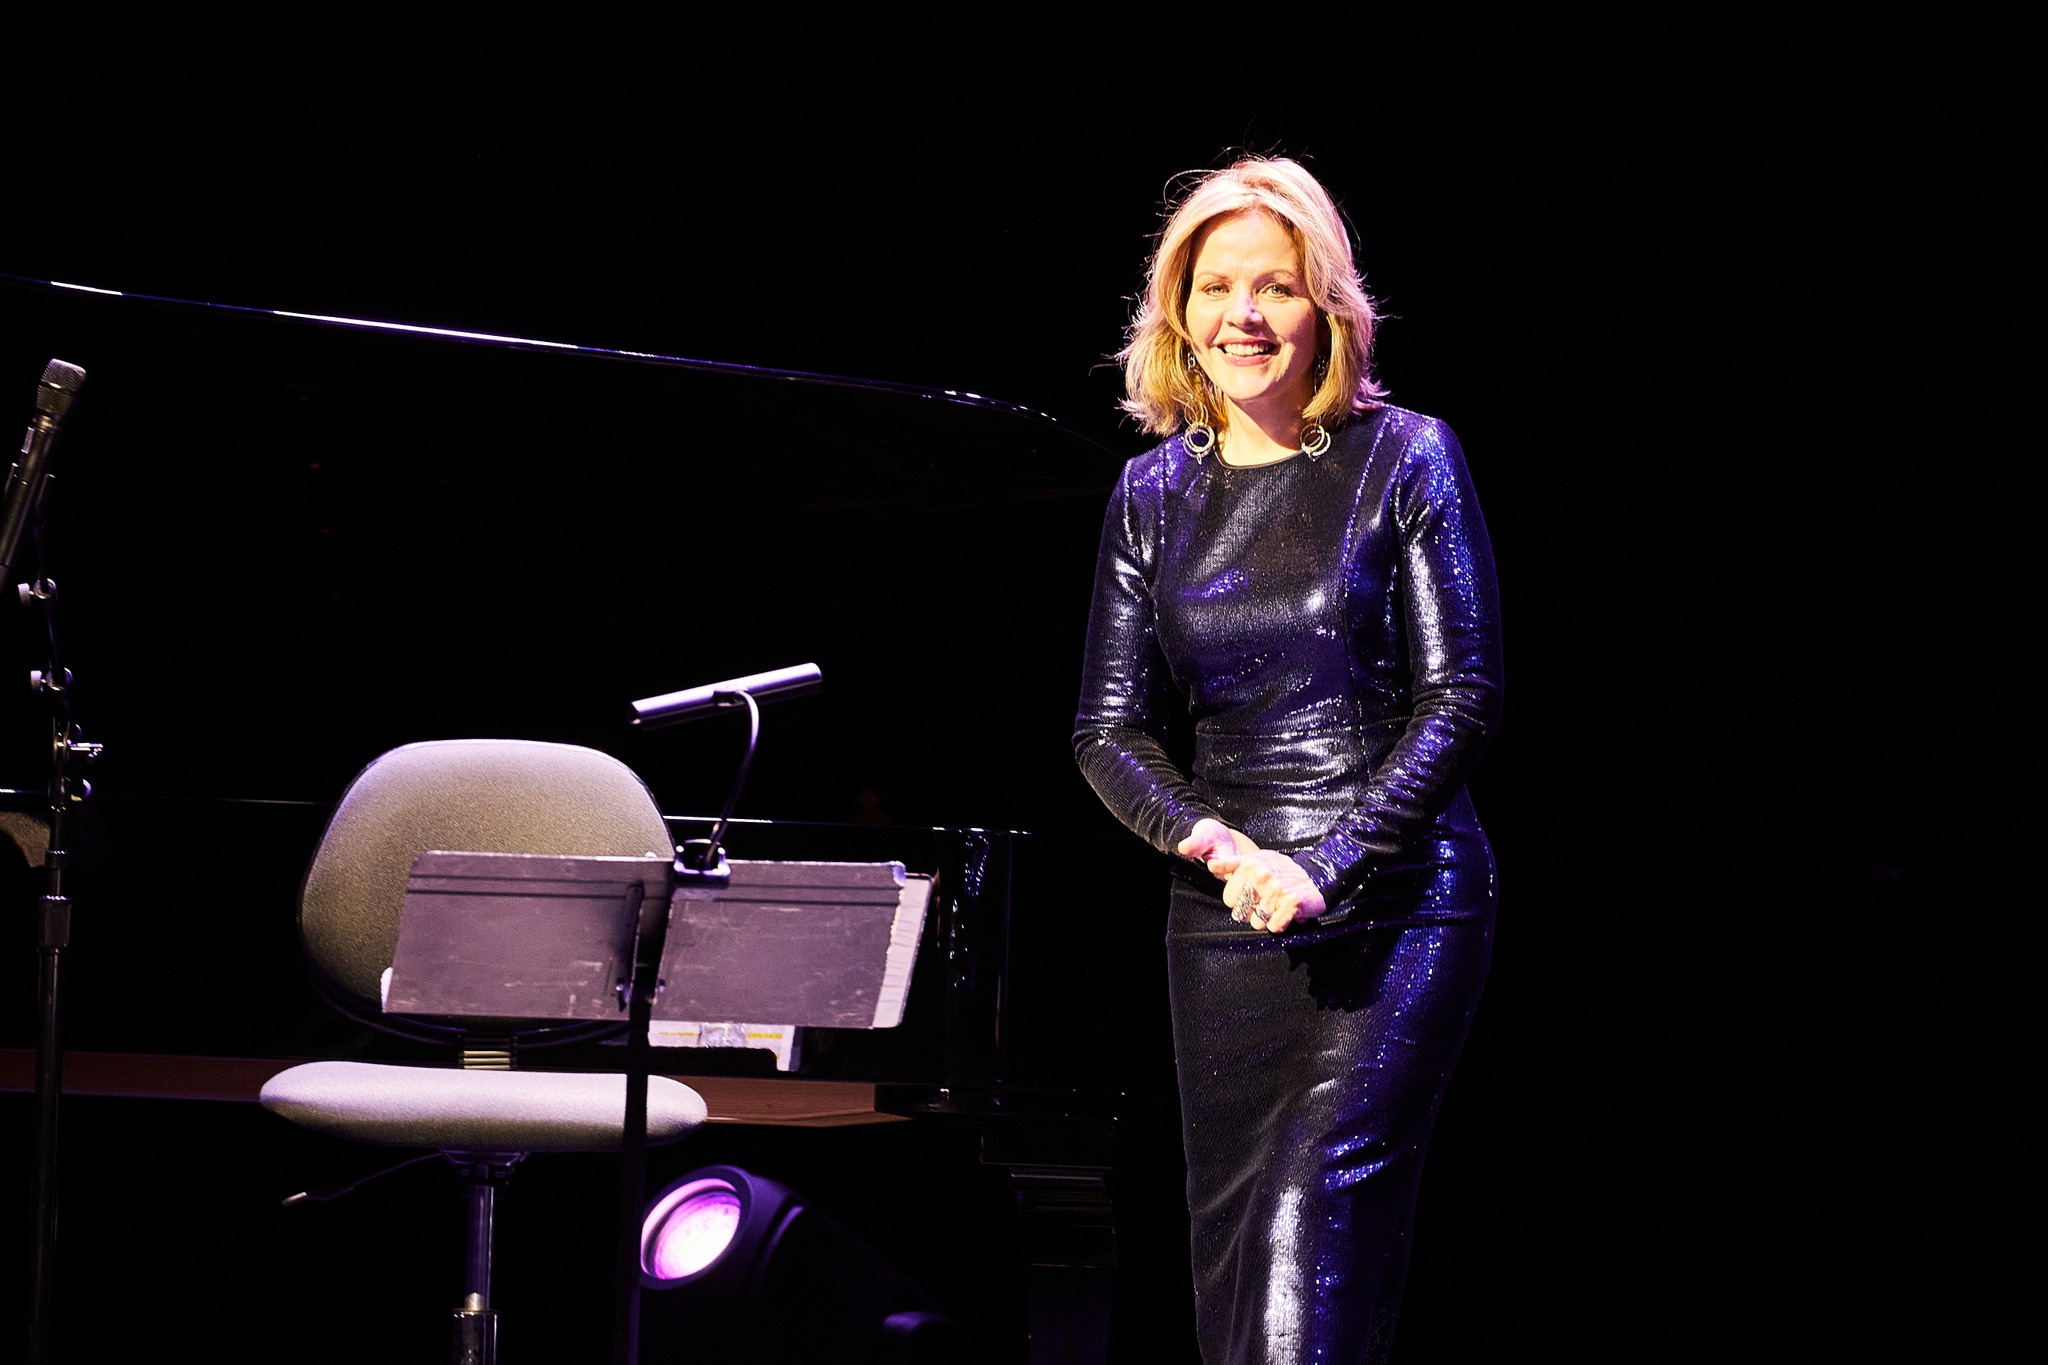 A singer smiling alone on a stage in front of a dark background. She is a white woman who wears a glittery, sequined purple dress and holds her hands together at her waist.